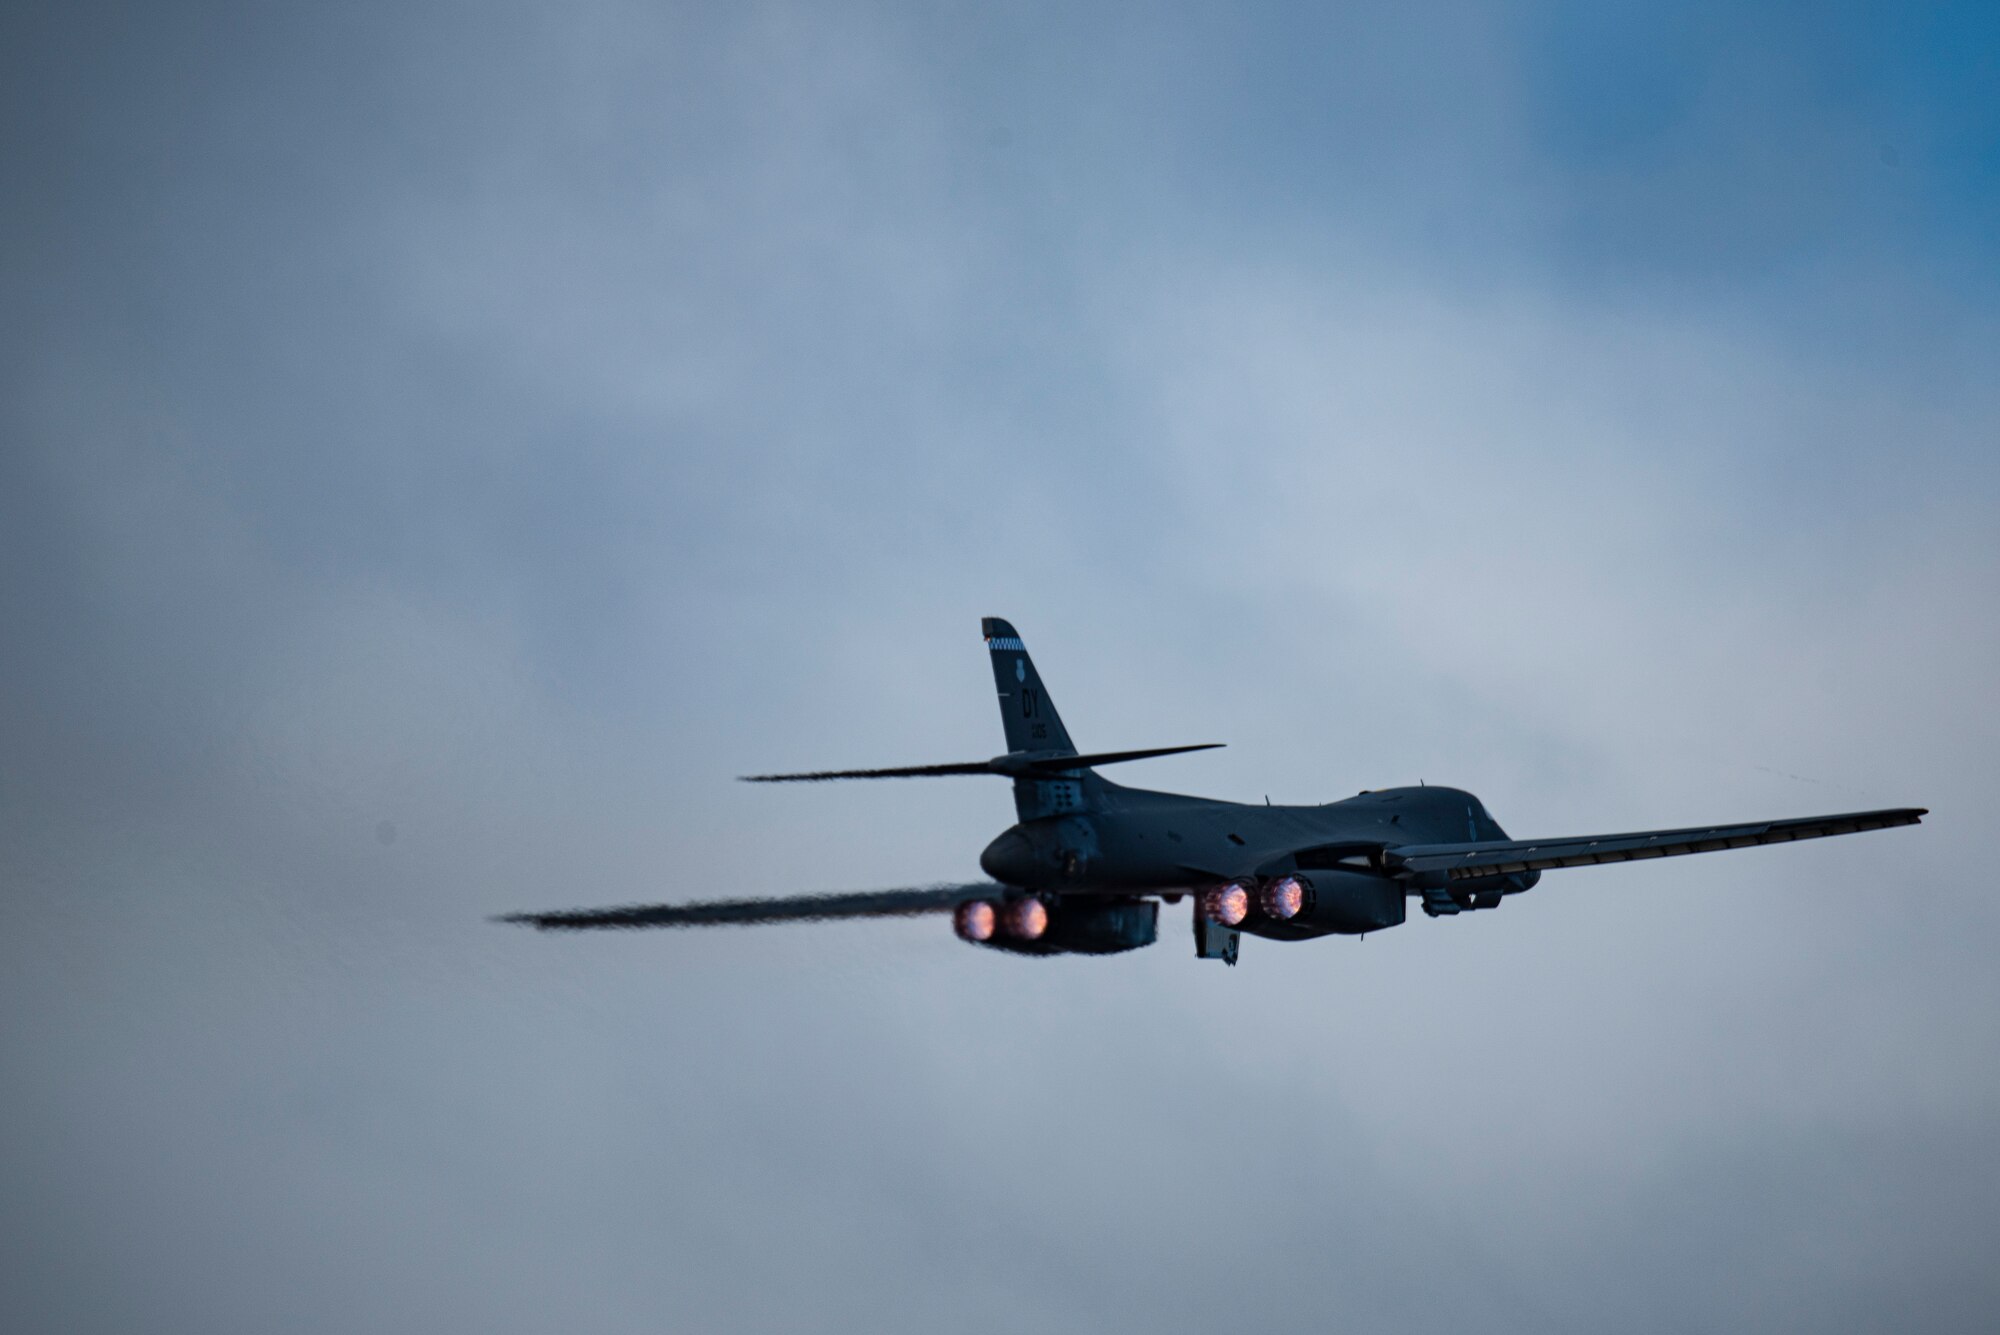 A B-1B Lancer assigned to the 9th Expeditionary Bomb Squadron takes off from Ørland Air Force Station, Norway, Feb. 26, 2021. Strategic bombers routinely participate in Bomber Task Force Europe training and operations to enhance the readiness necessary to respond to any contingency or challenge across the globe. (U.S. Air Force photo Airman 1st Class Colin Hollowell)